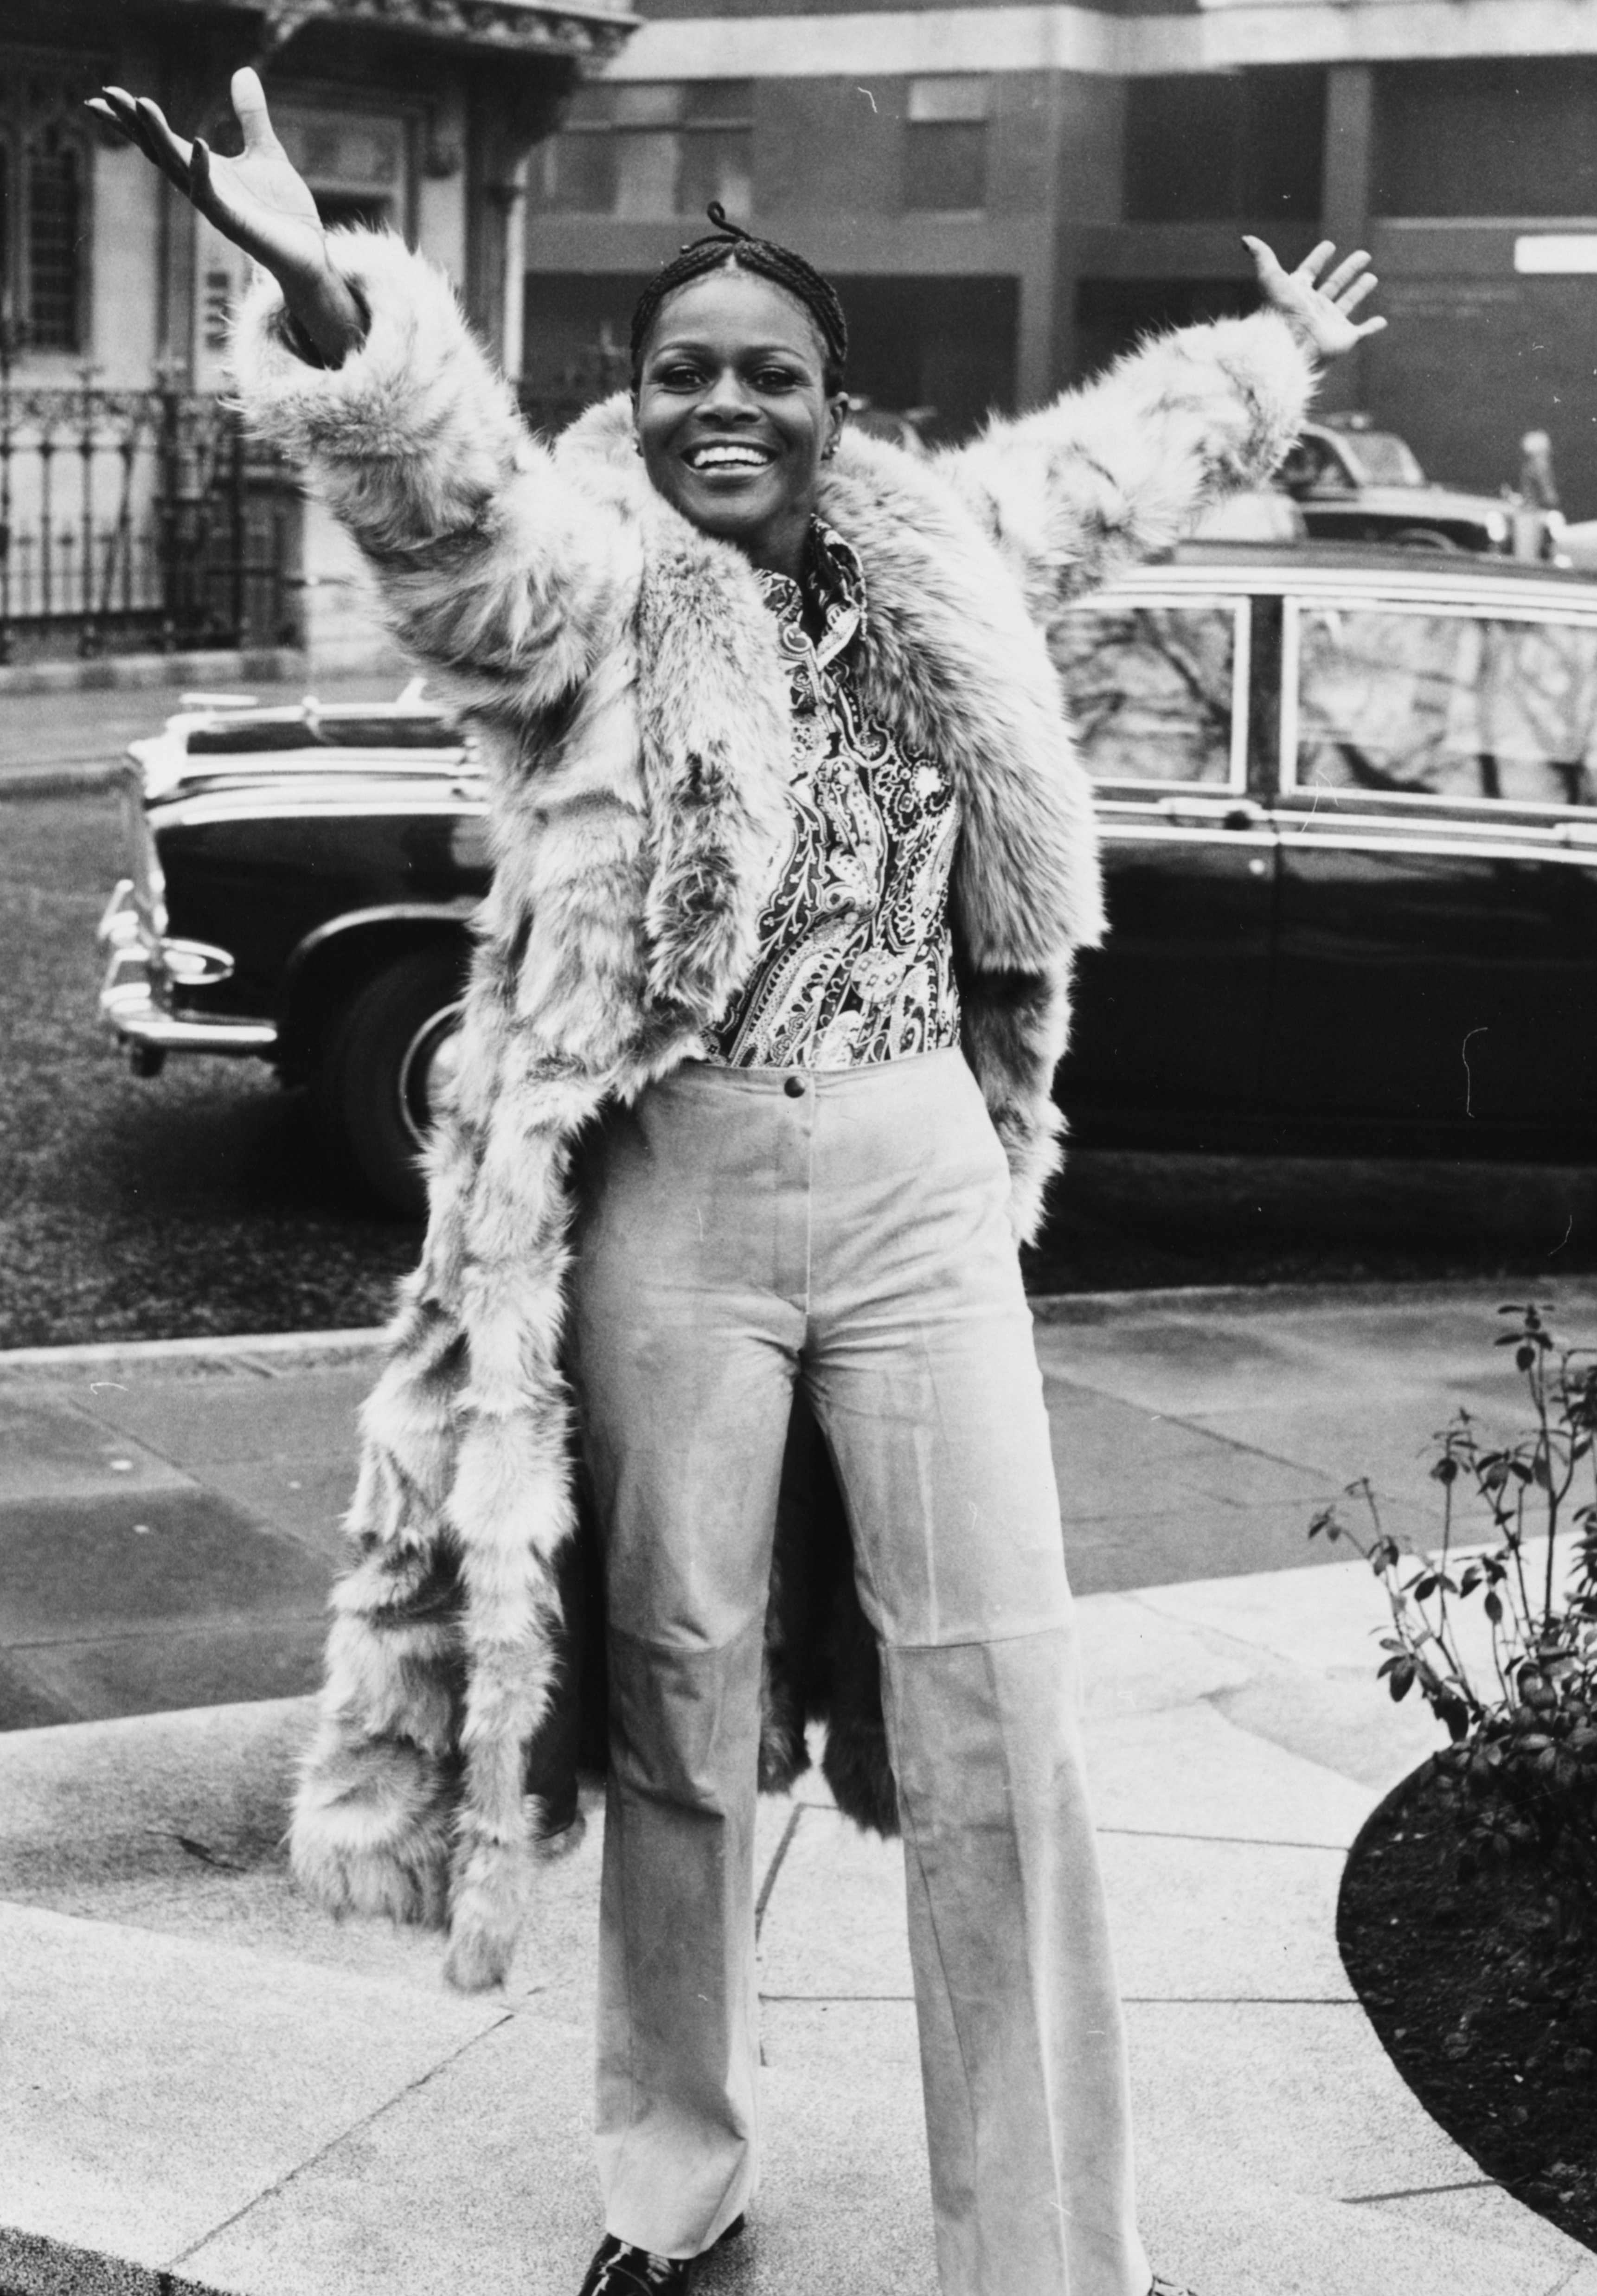 Cicely Tyson smiling and raising her arms in the air during a visit to London, February 19, 1973.| Source: Getty Images